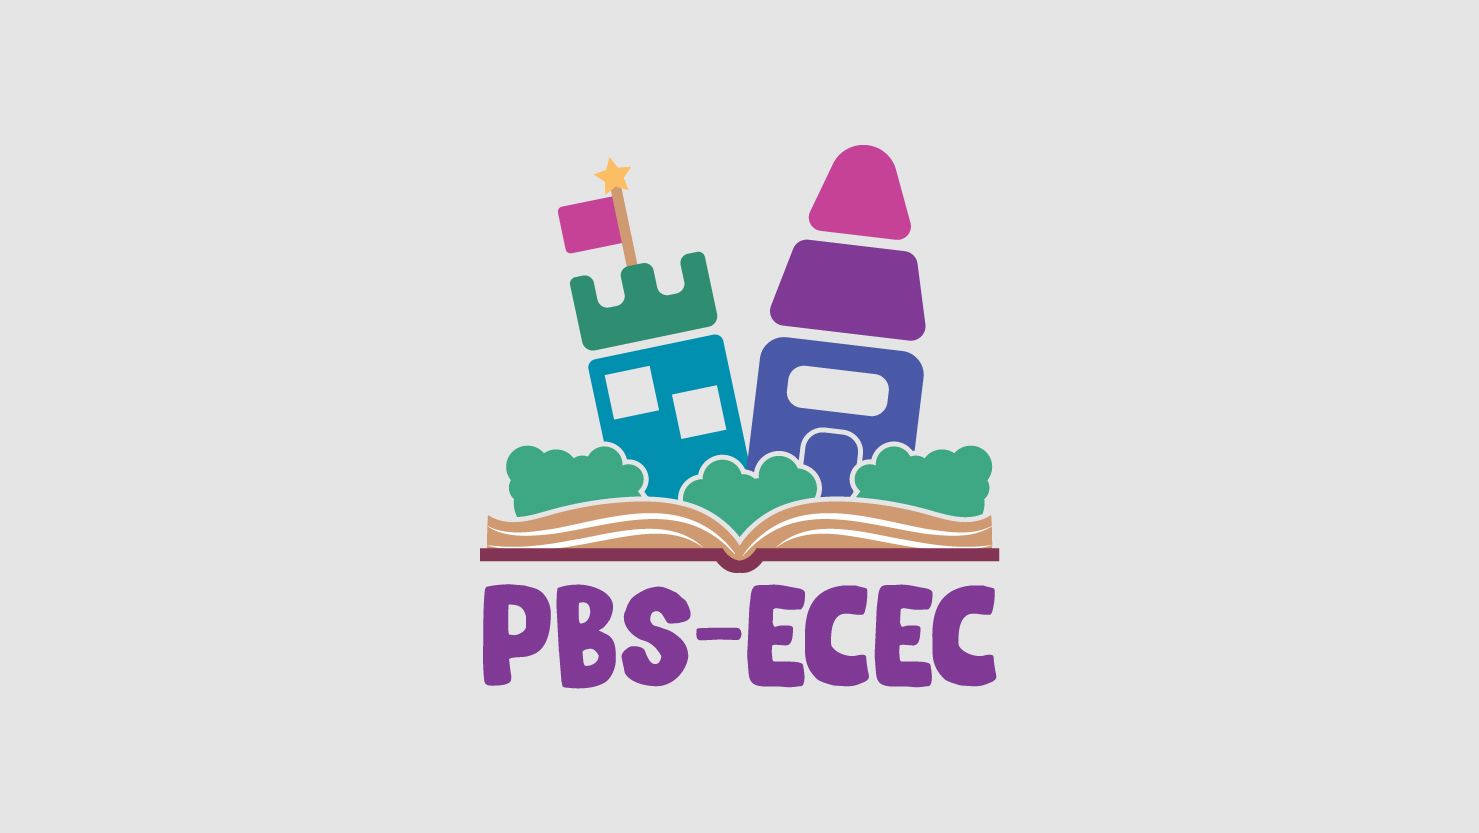 PBS-ECEC – Implementing Positive Behaviour Support in Early Childhood Education and Care